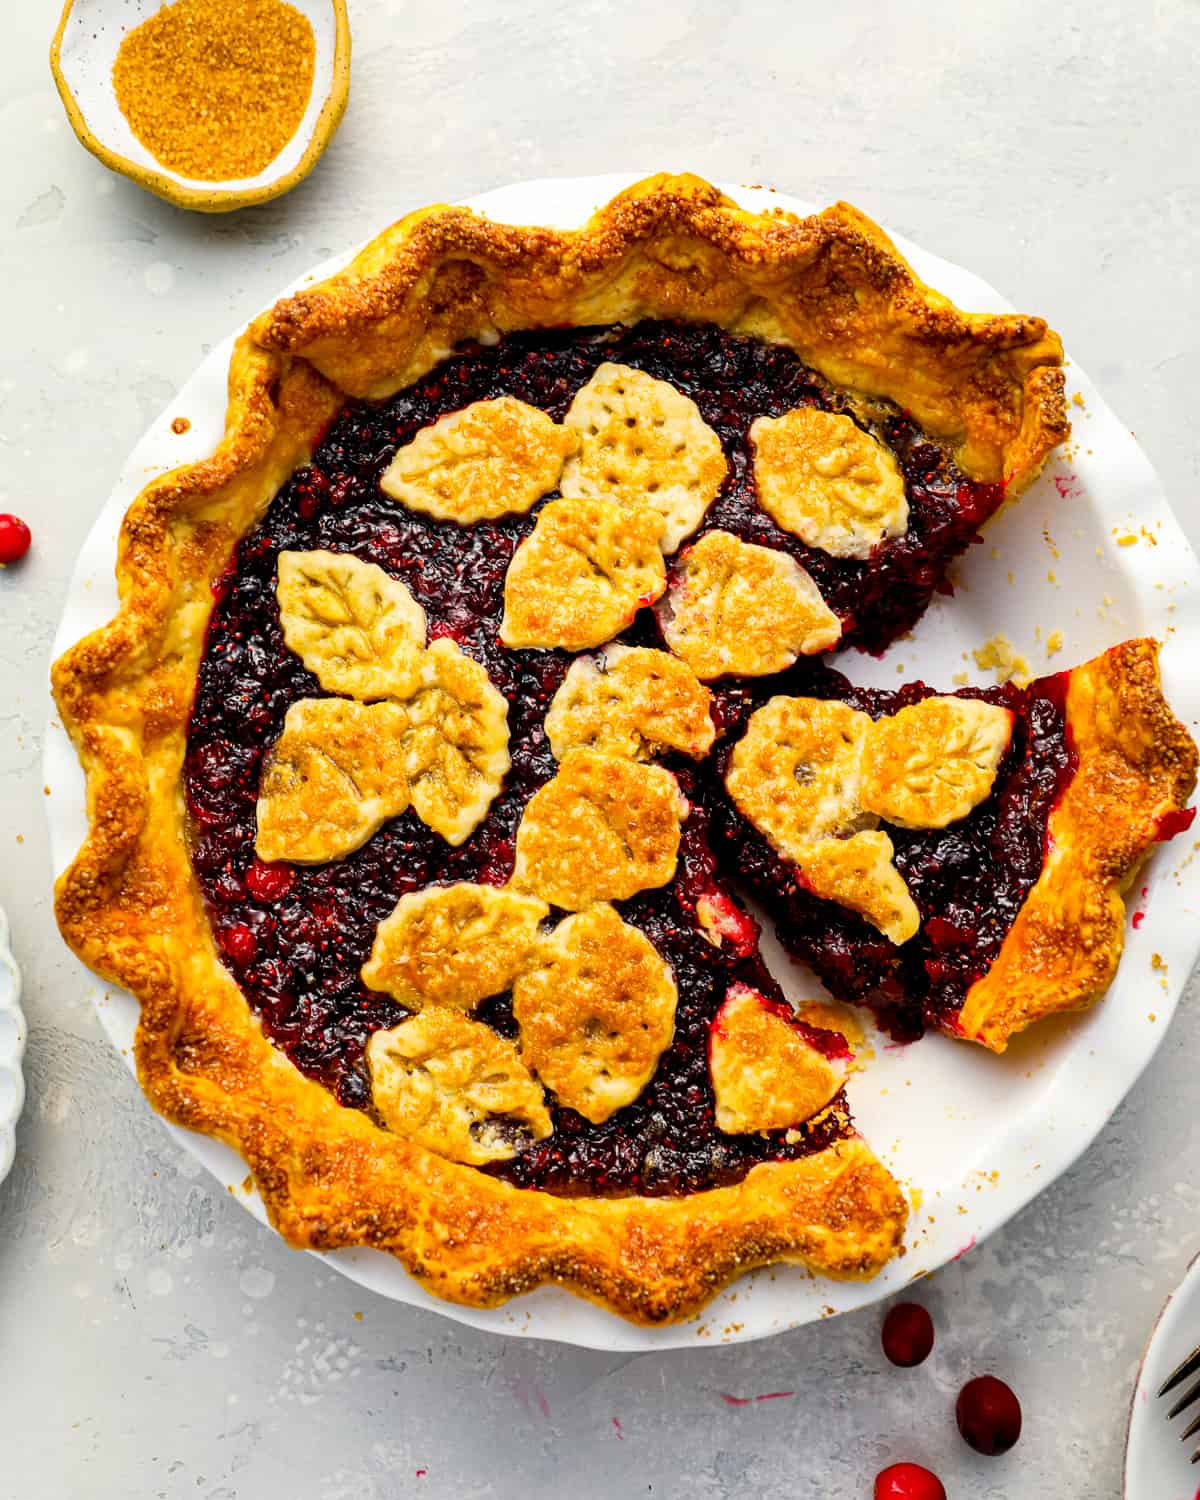 A cranberry pie topped with leaf- and acorn-shaped pie crust pieces; one slice is taken out.